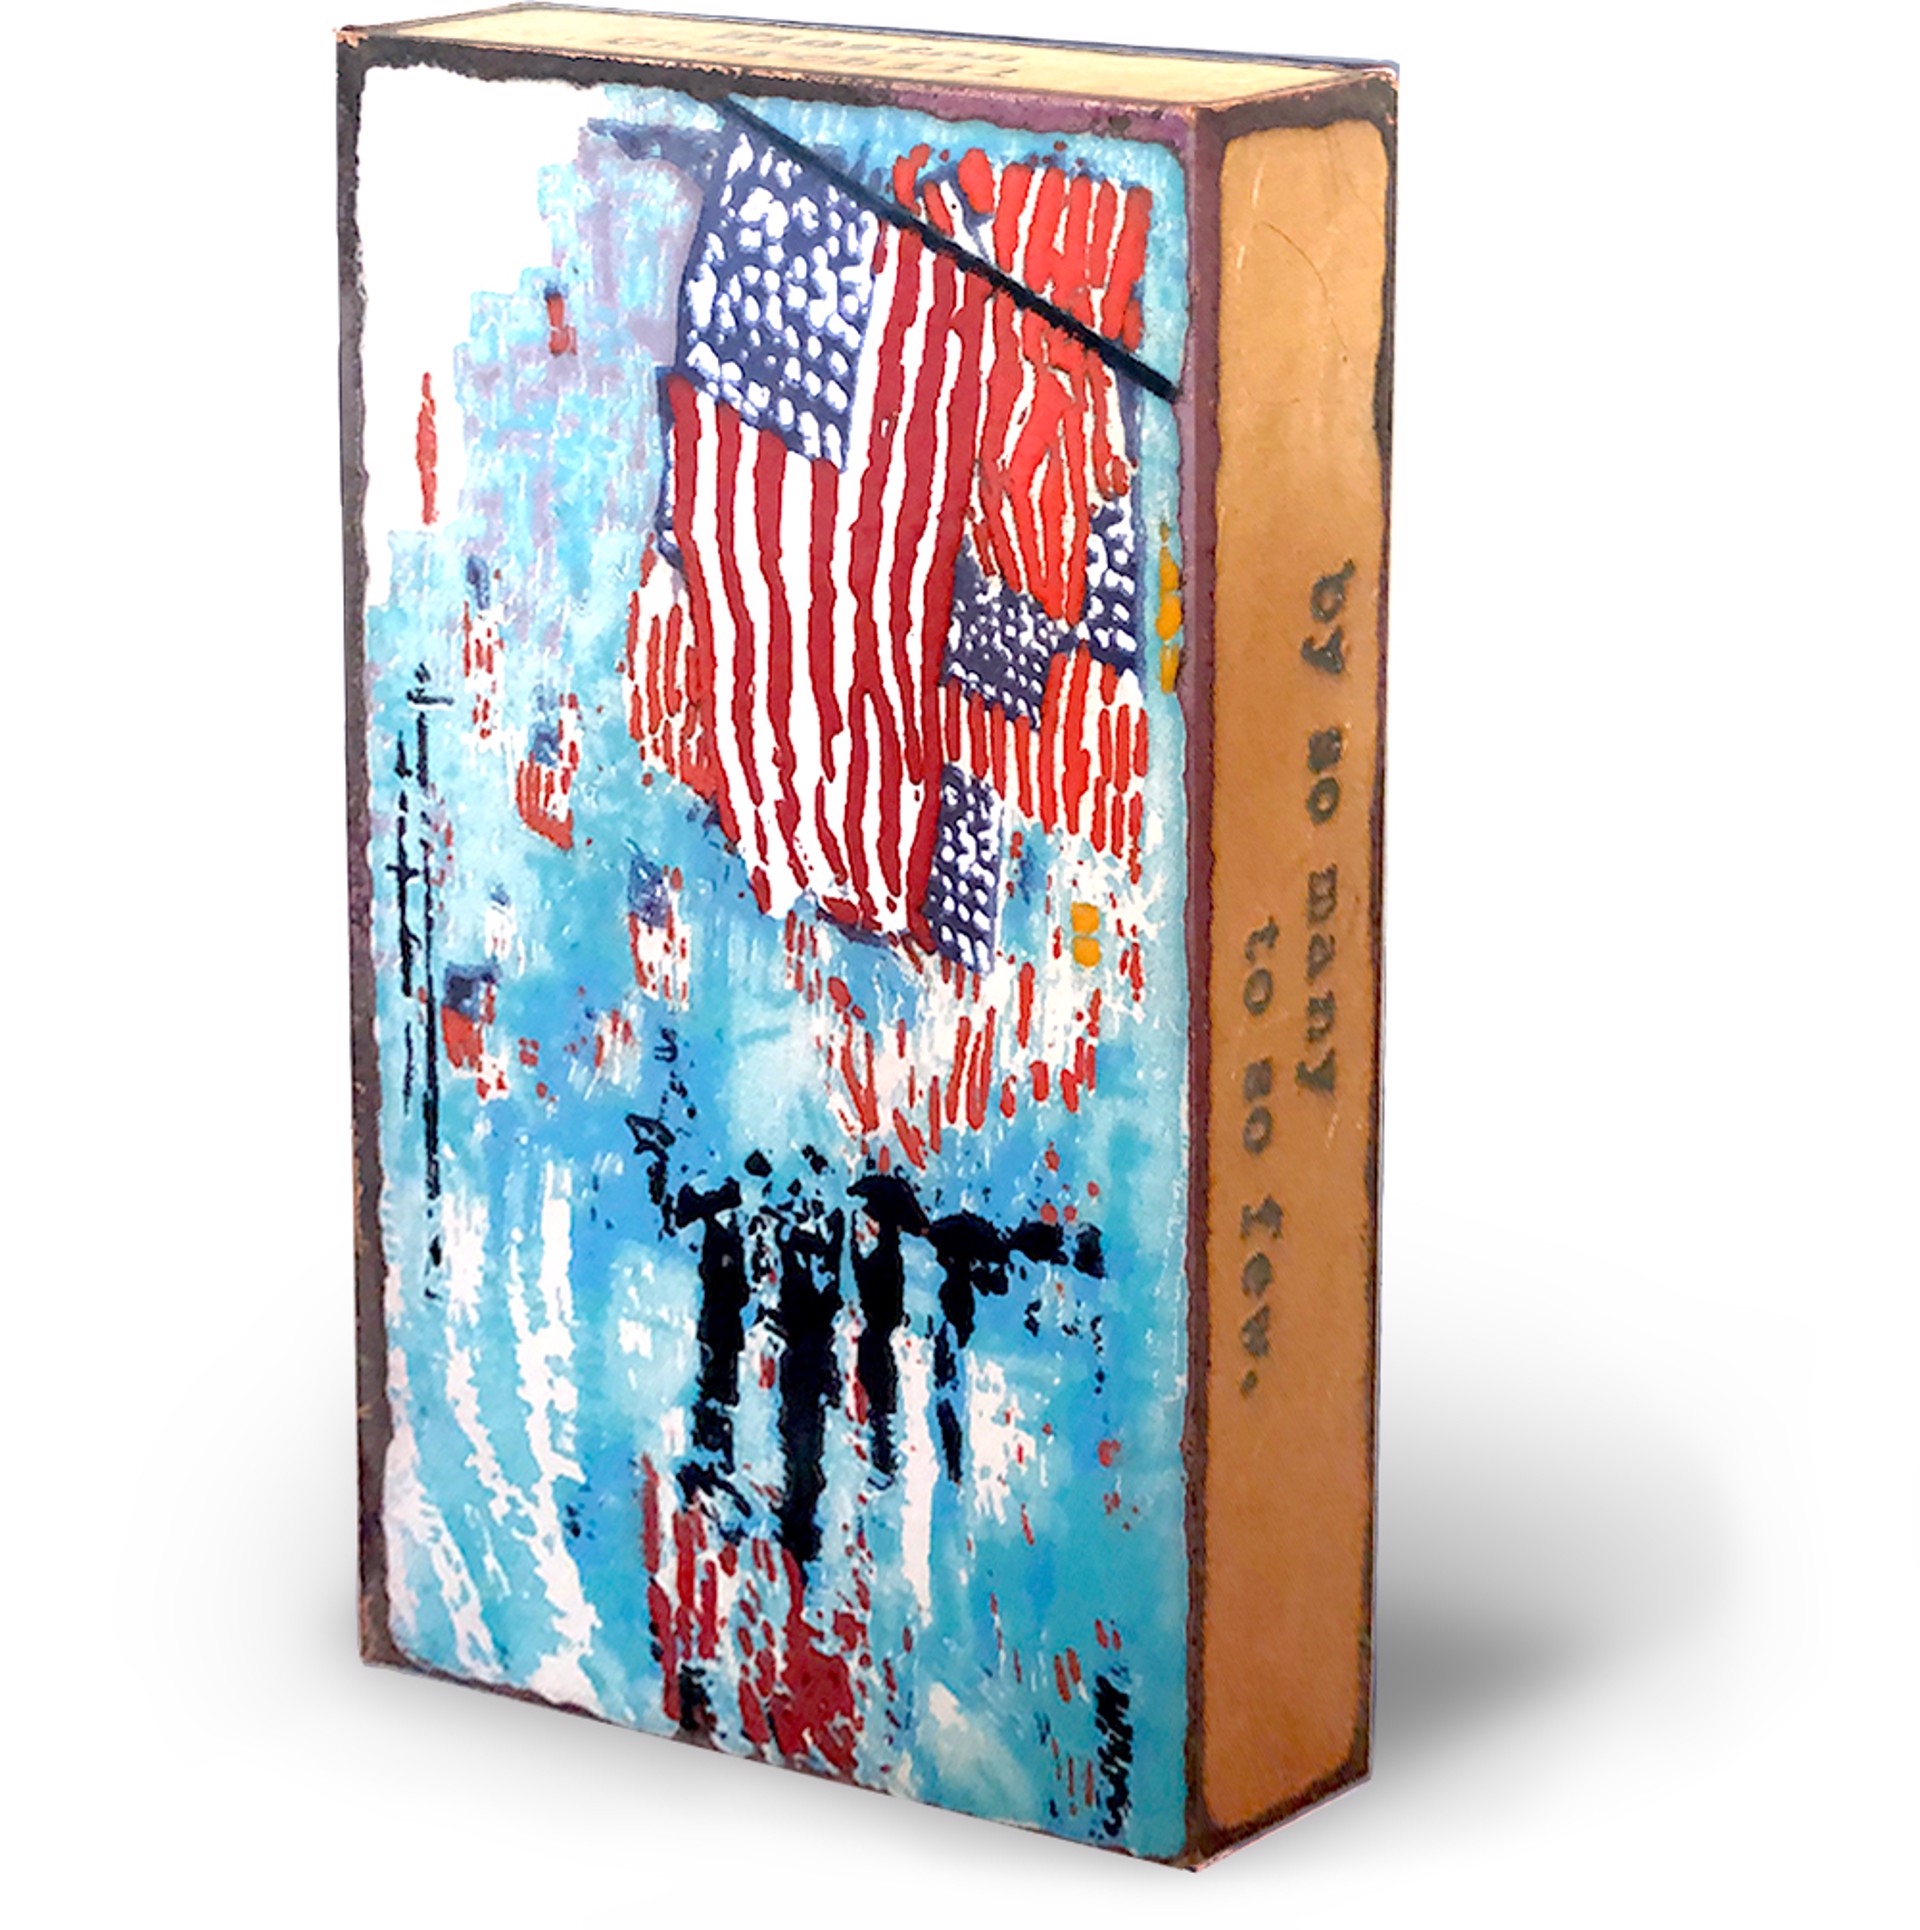 American Heroes ~ "Never was so much owed to so many by so few" Winston Churchill.  Each American Heroes 251 Spiritile purchased from now through Labor Day 2020 will have a special 'thank you' message from Houston sealed on the reverse side. 